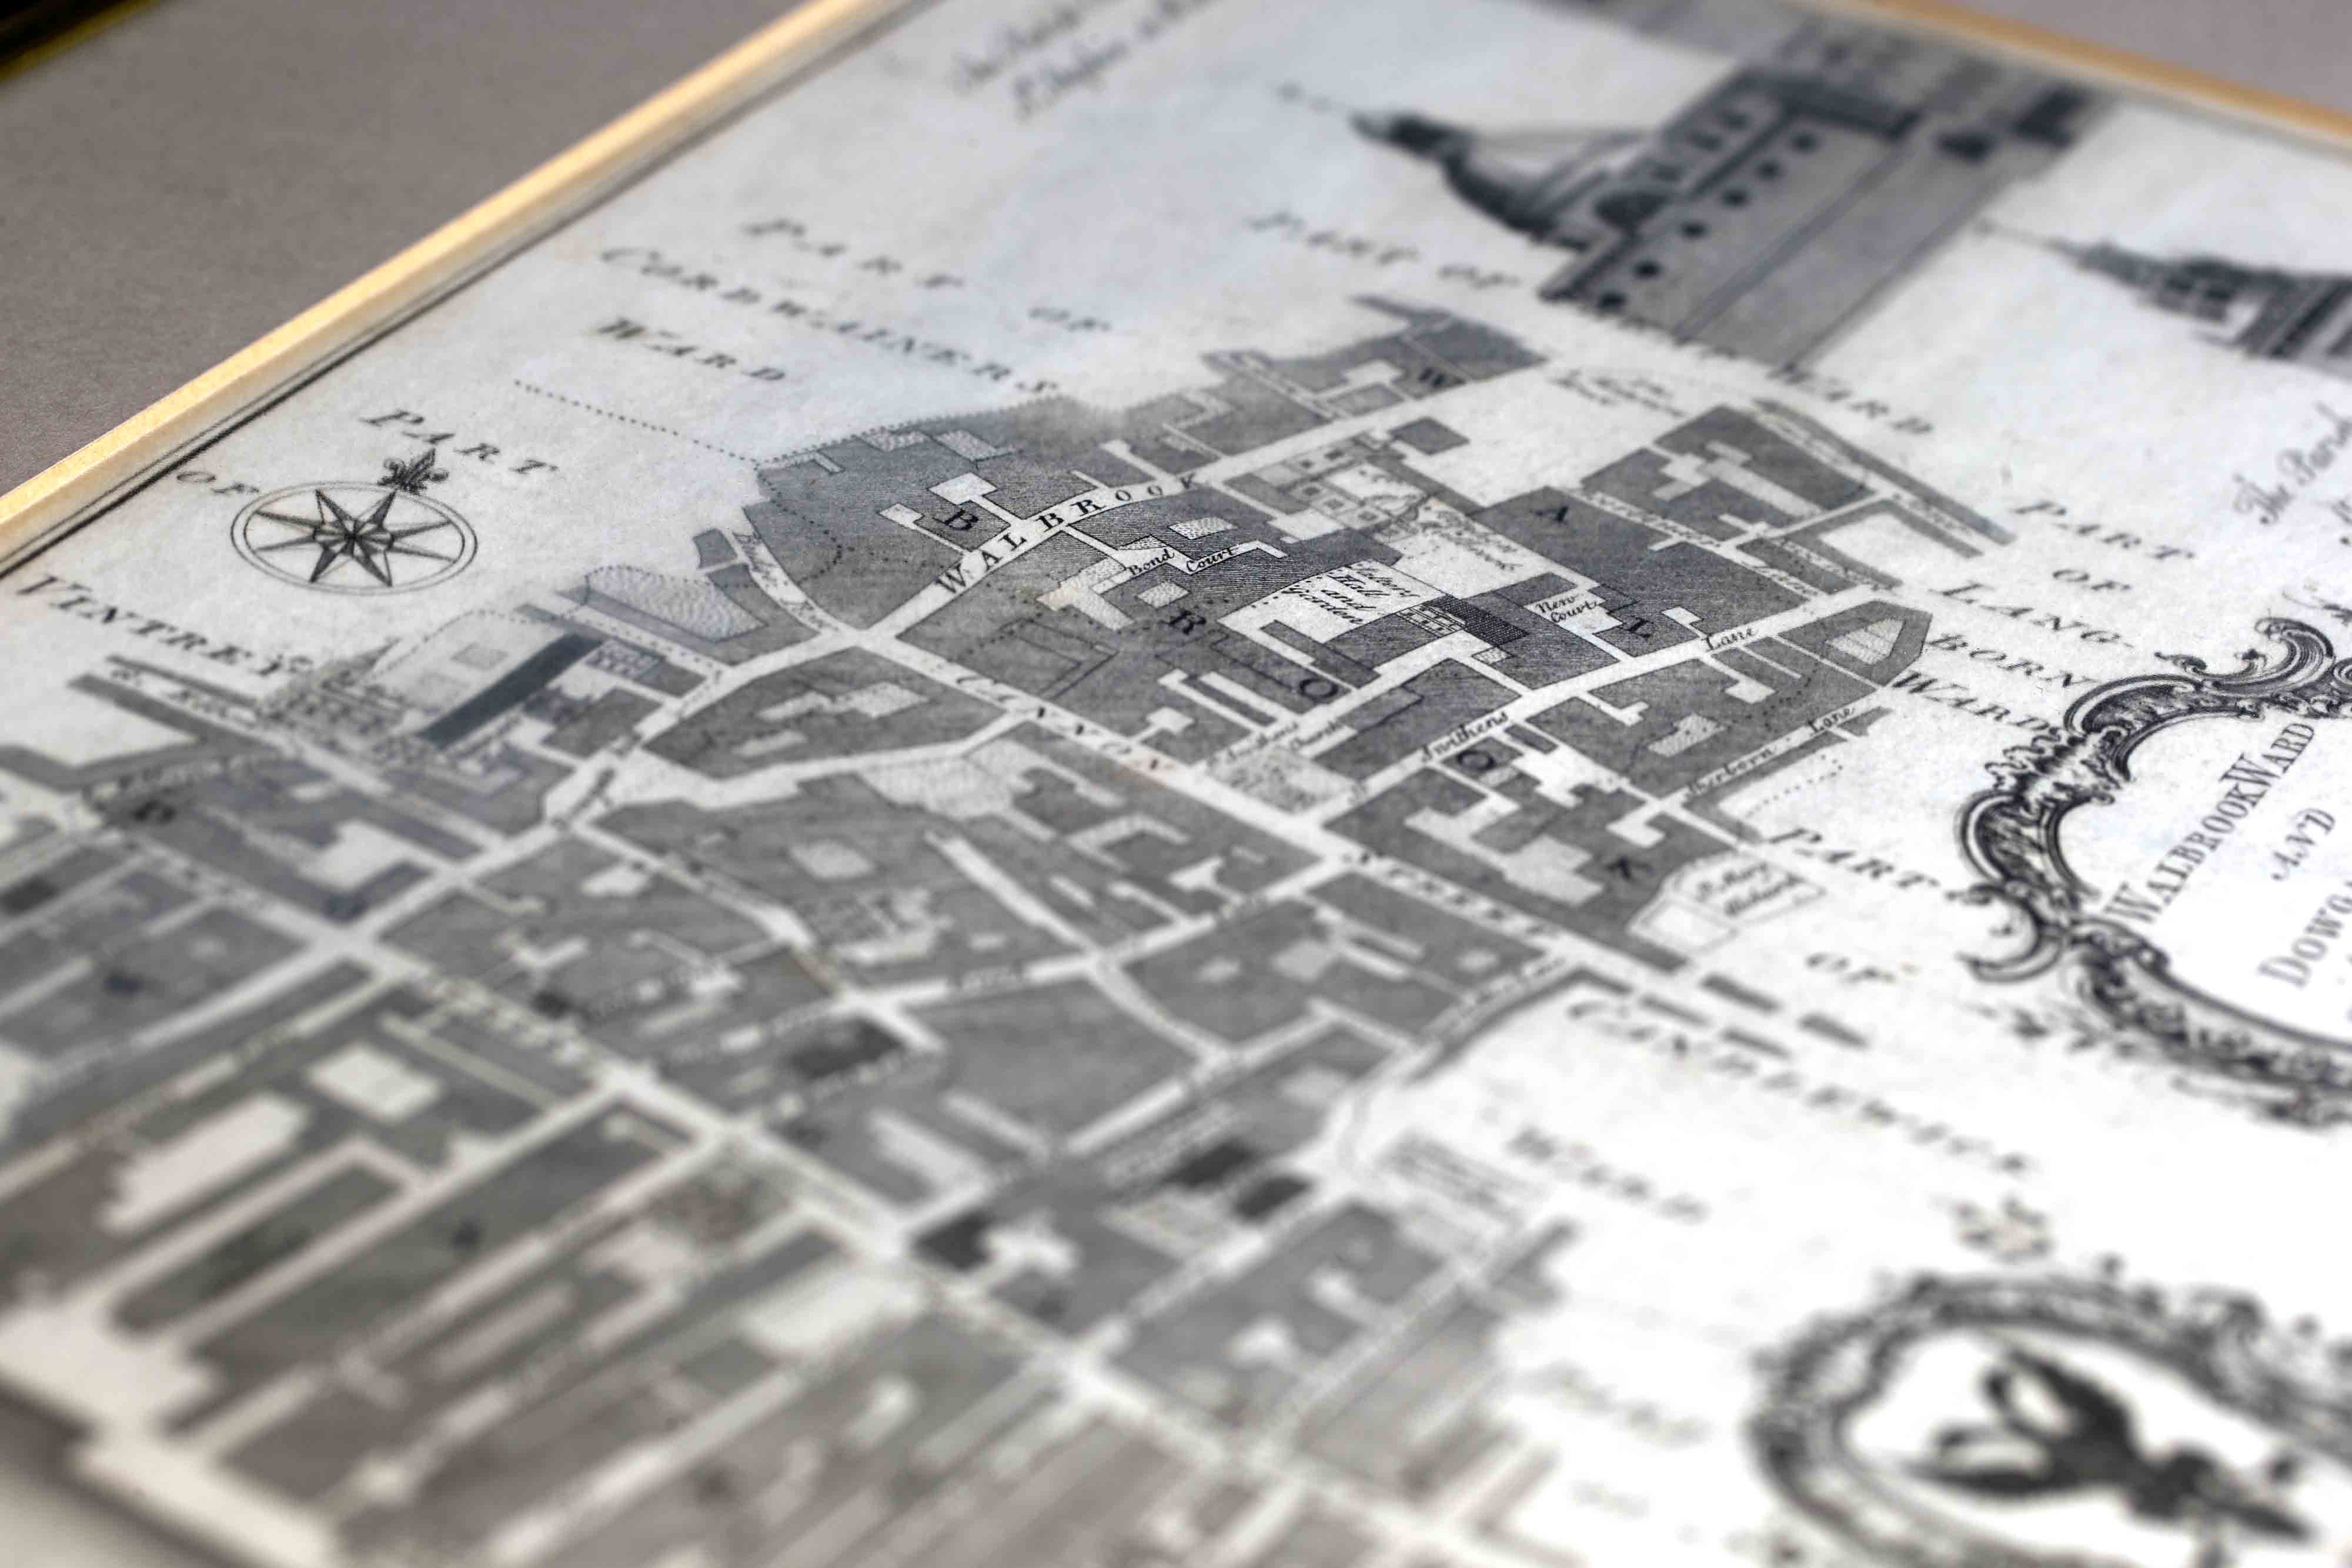 Zoomed in image of an old map near the Rothschild & Co head office